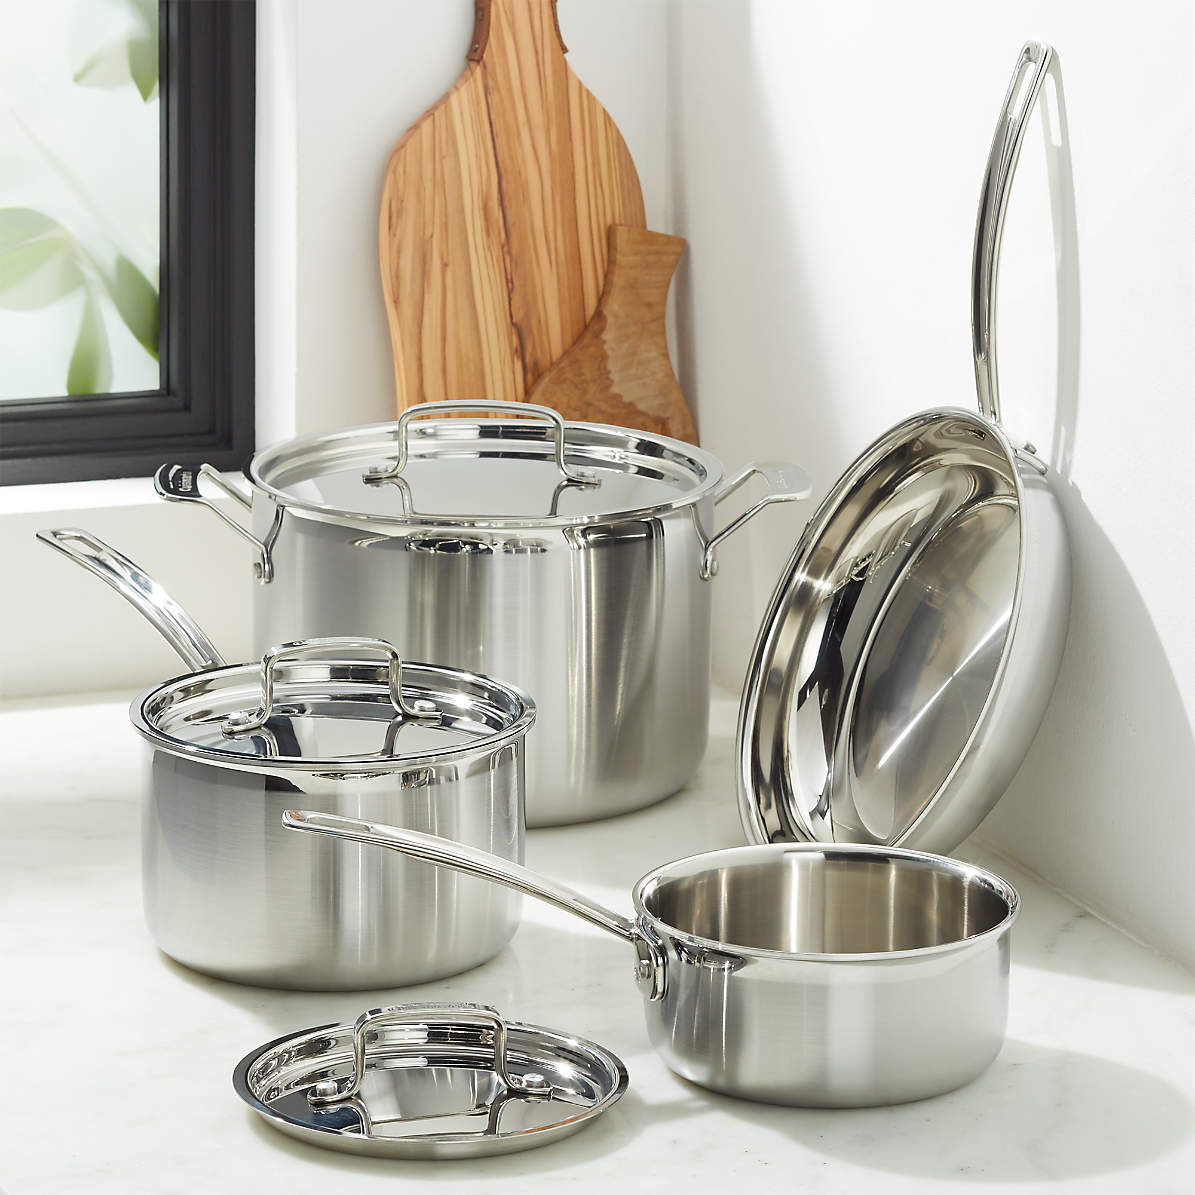 Tri-ply Cookware